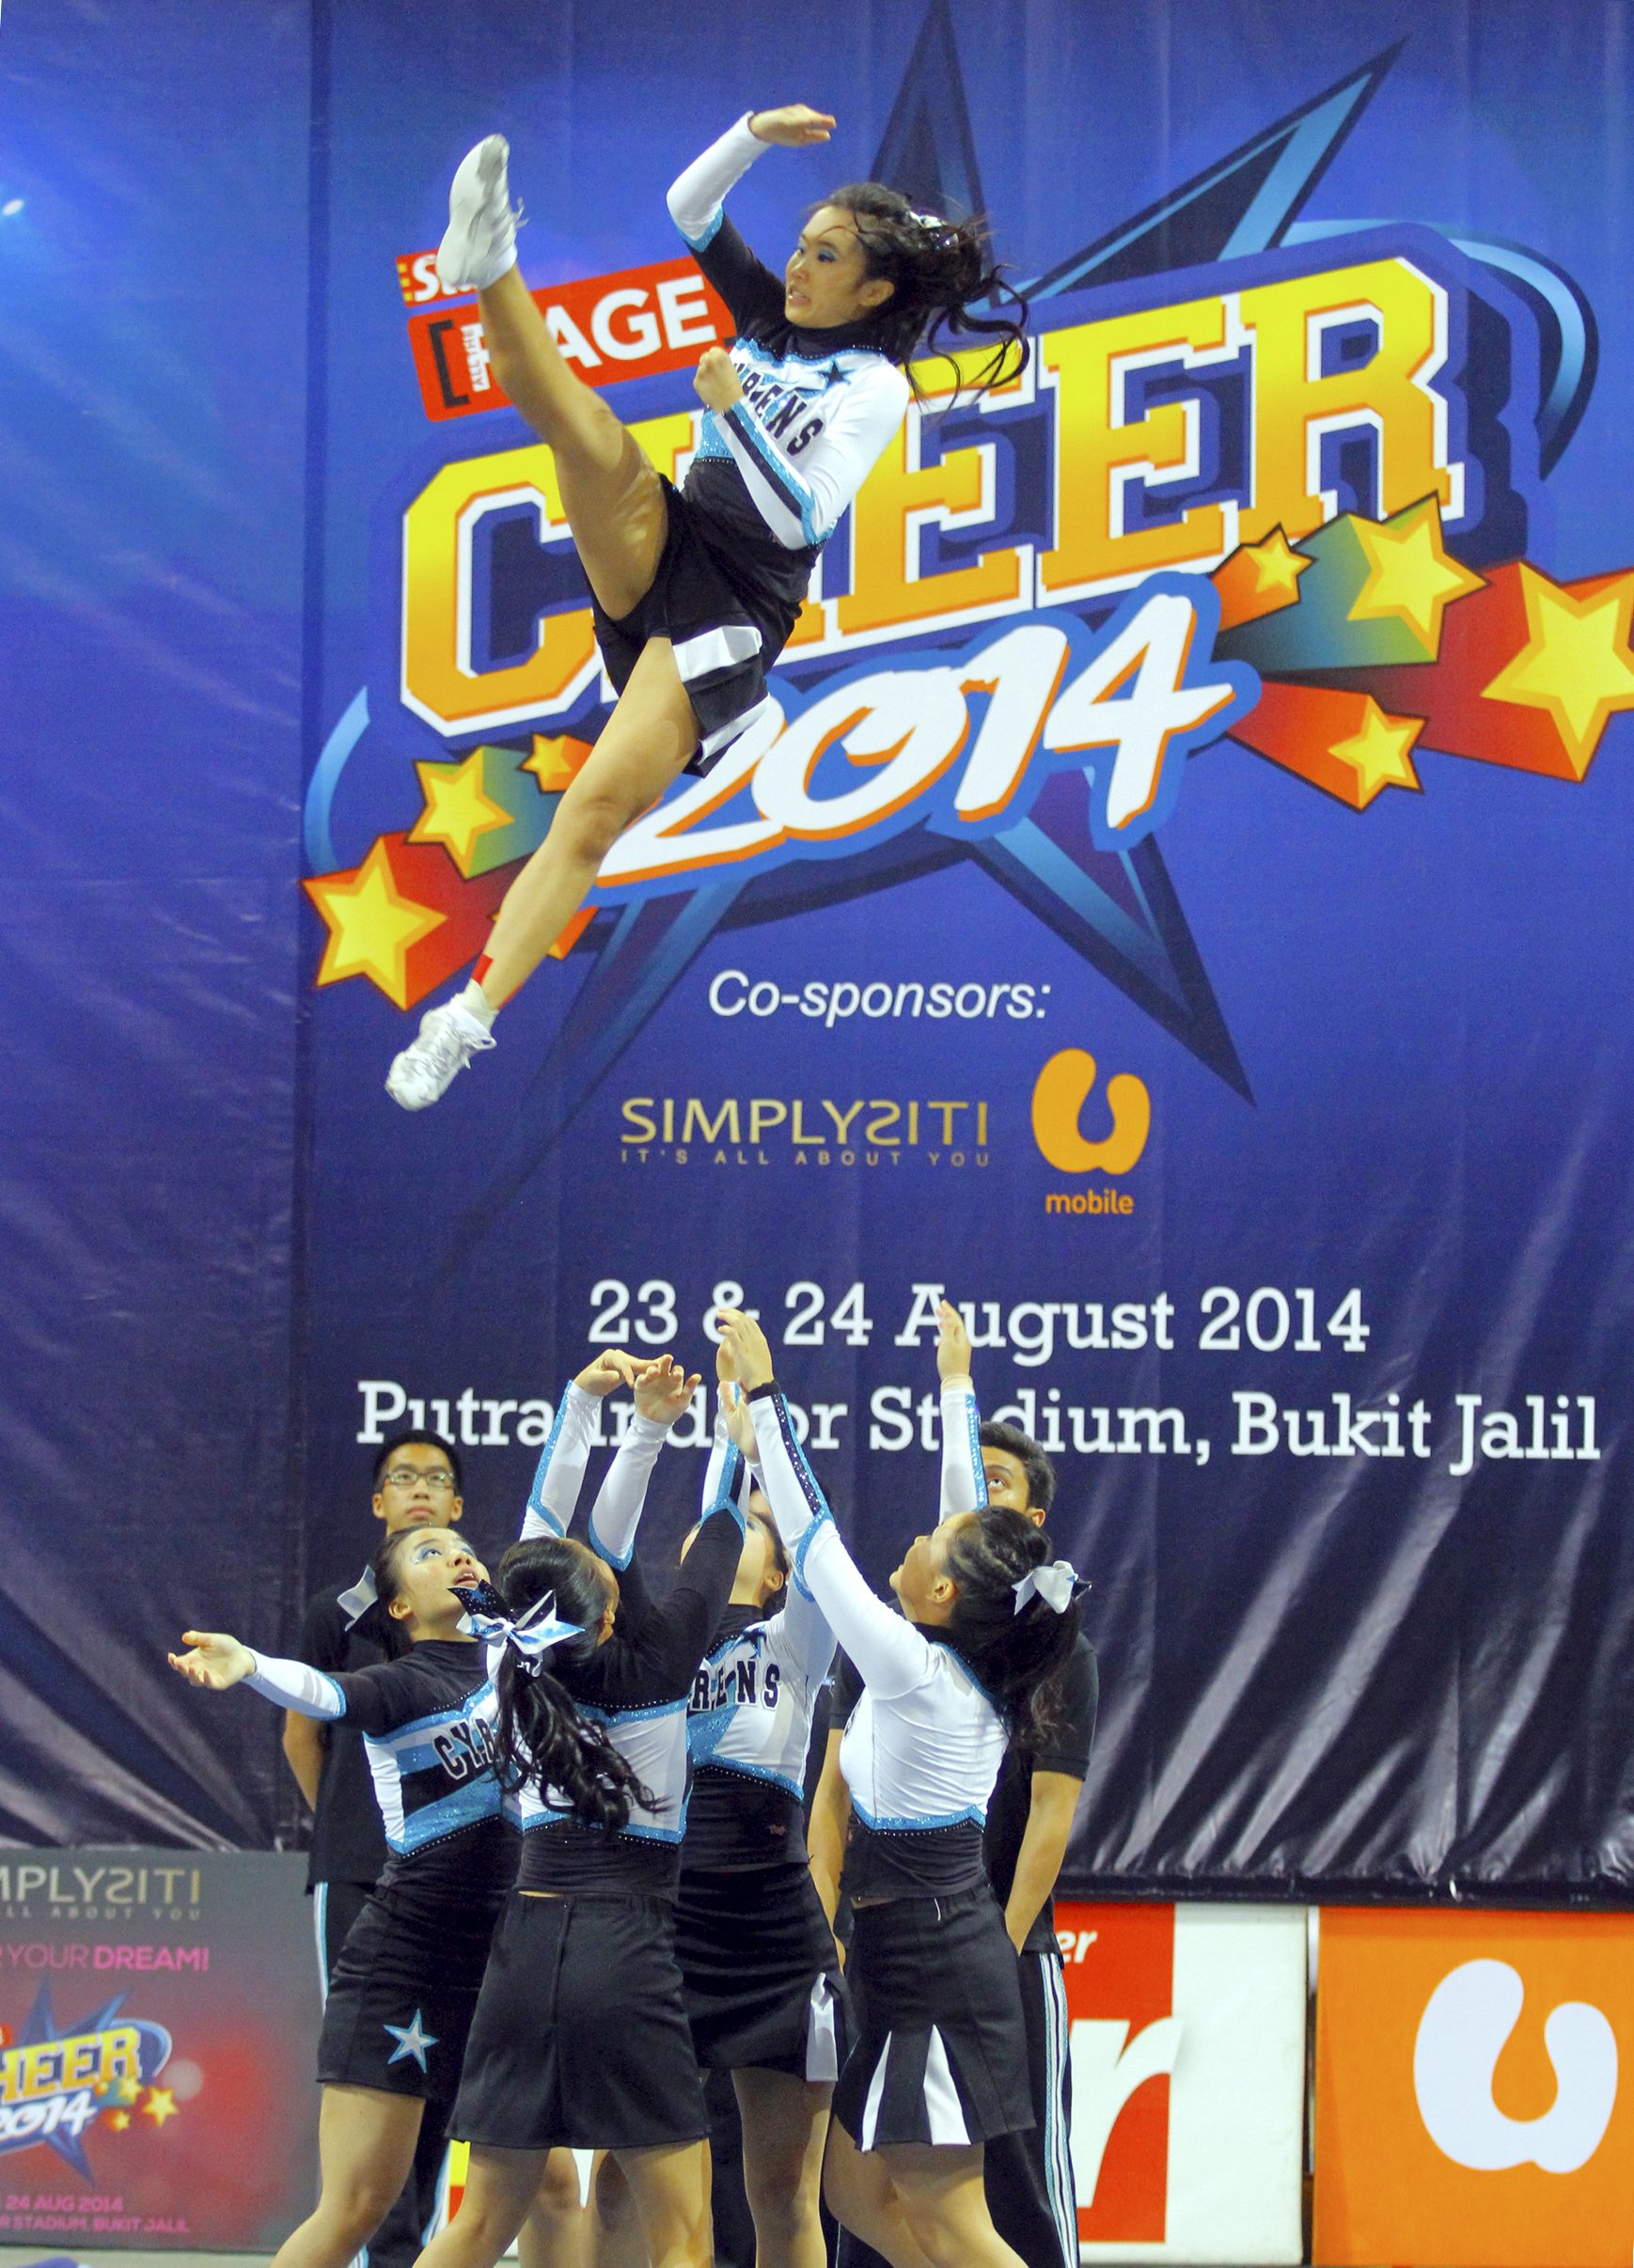 The Cyrens' routines and stunts seem to get better and better every year, including at this year's CHEER 2014 finals where they took home the coveted All-Girls title.